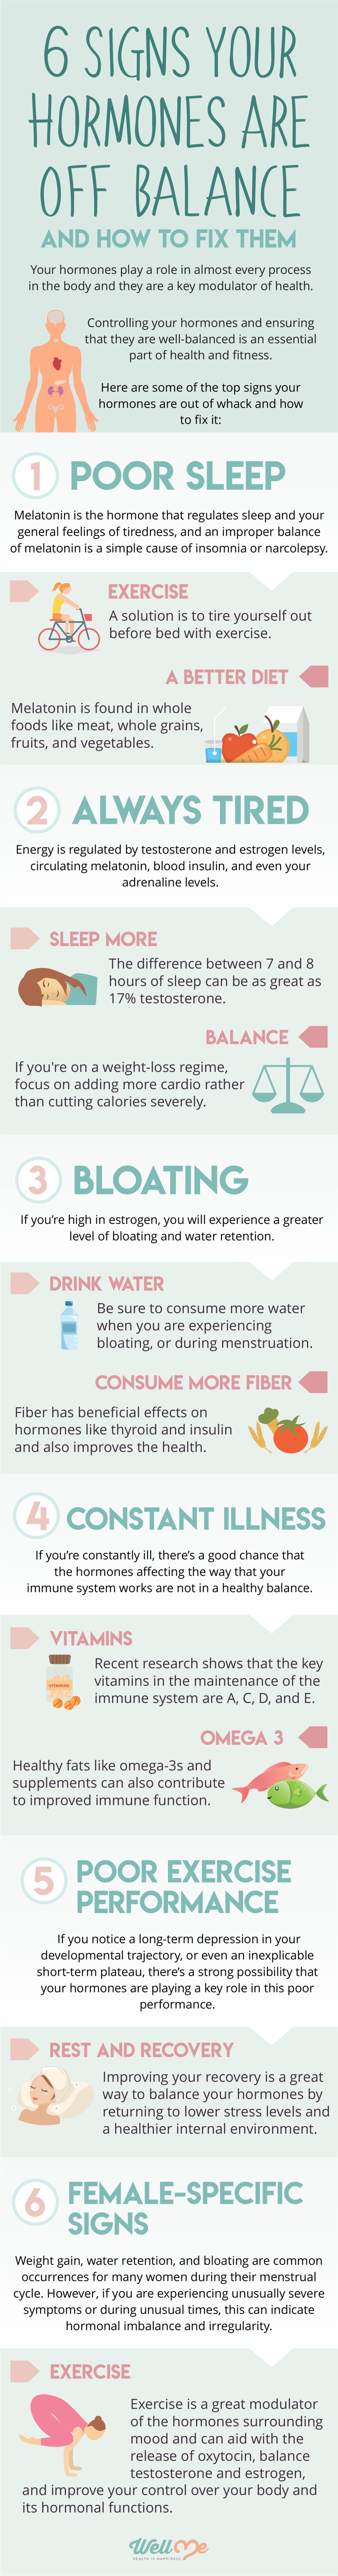 6 Signs Your Hormones Are Off Balance infographic 